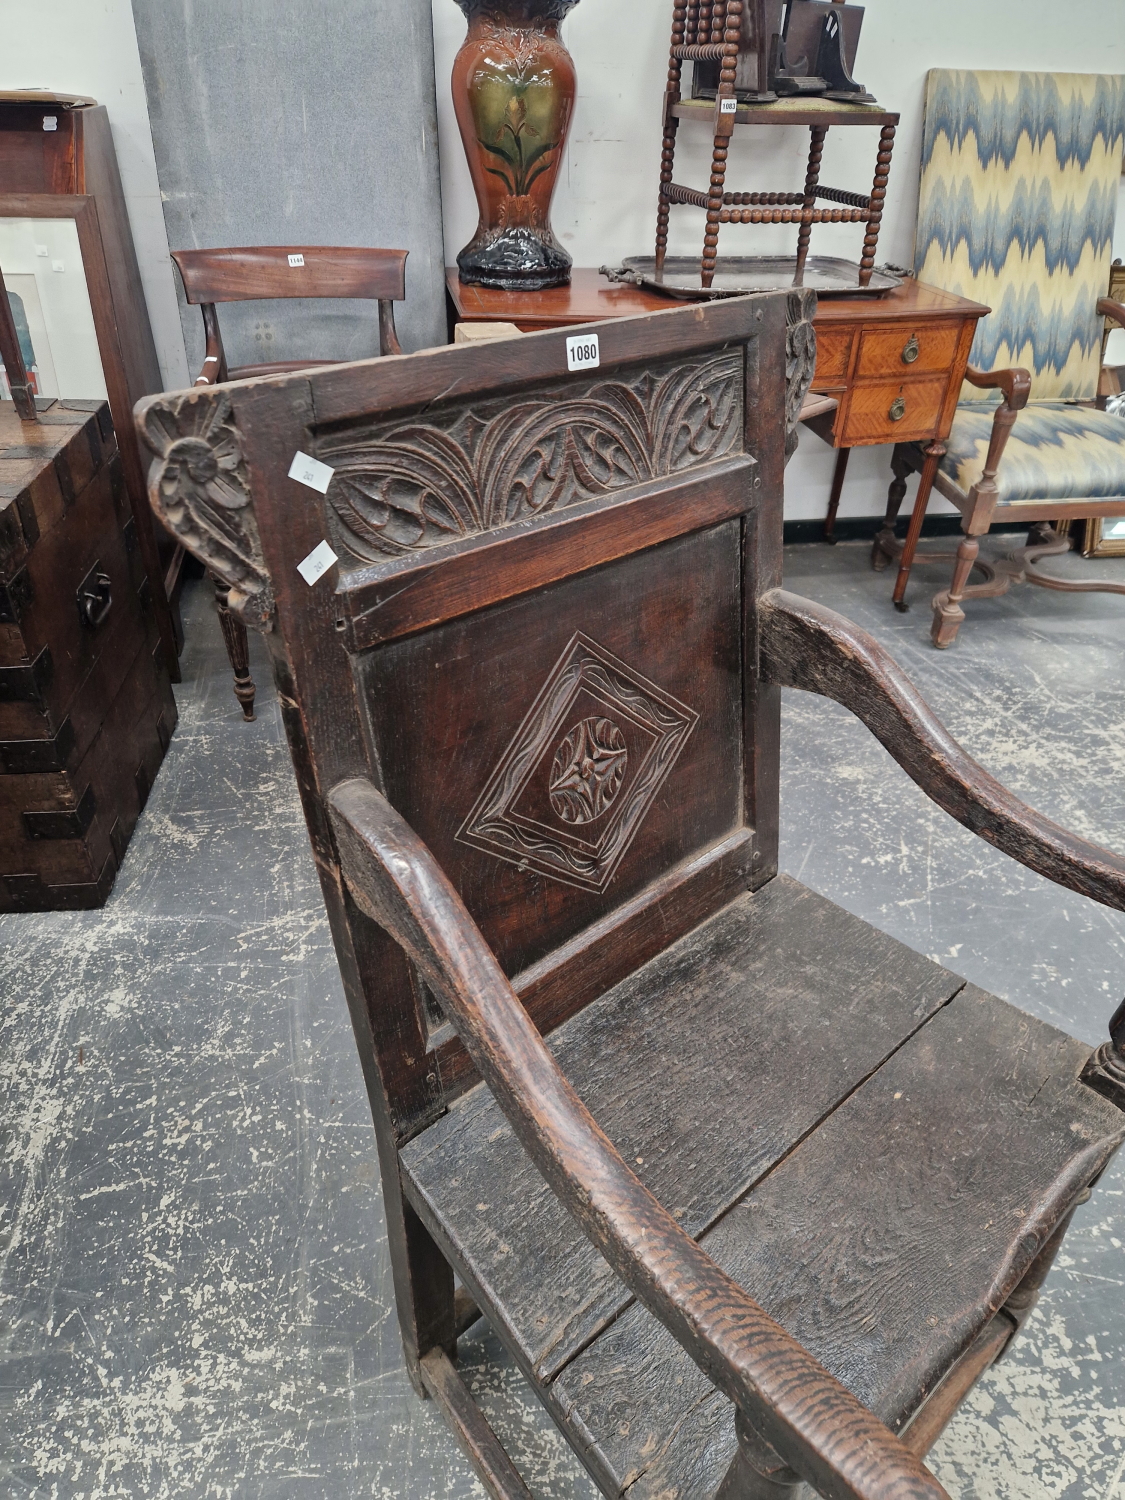 AN EARLY 18TH CENTURY WAINSCOTT CHAIR. - Image 3 of 6